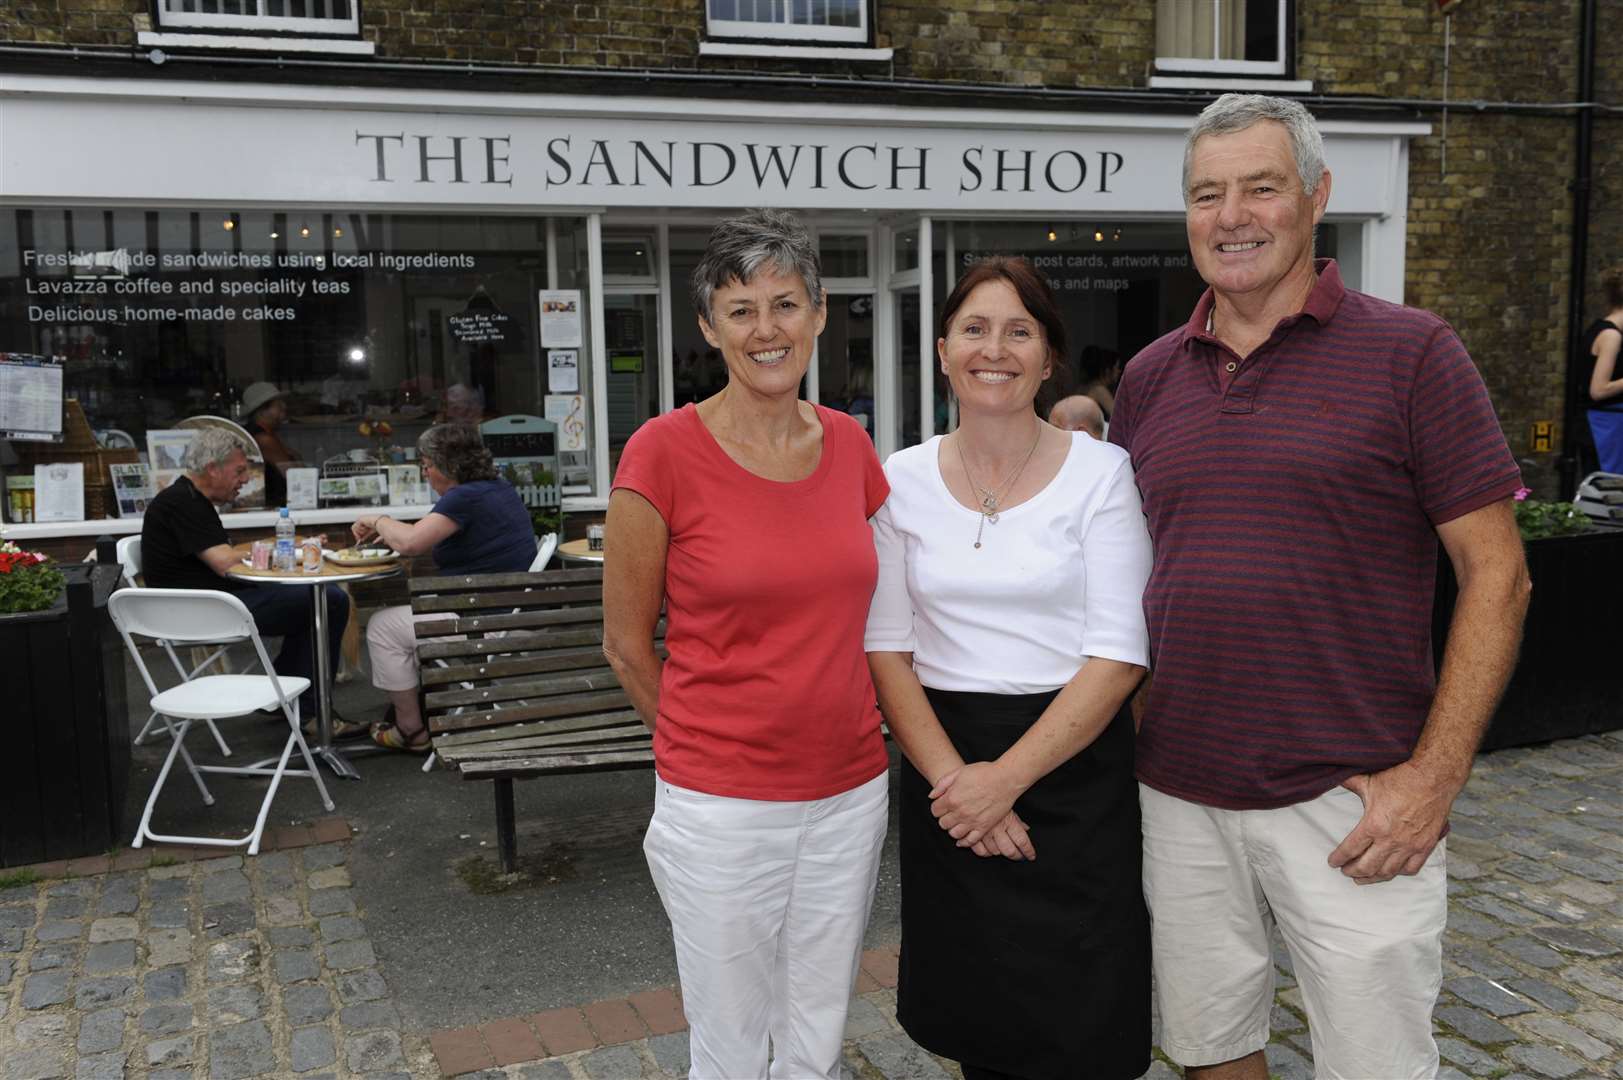 Sue Laslett, shop manager Kathy Wilson and Steve Laslett celebrating the opening of The Sandwich Shop